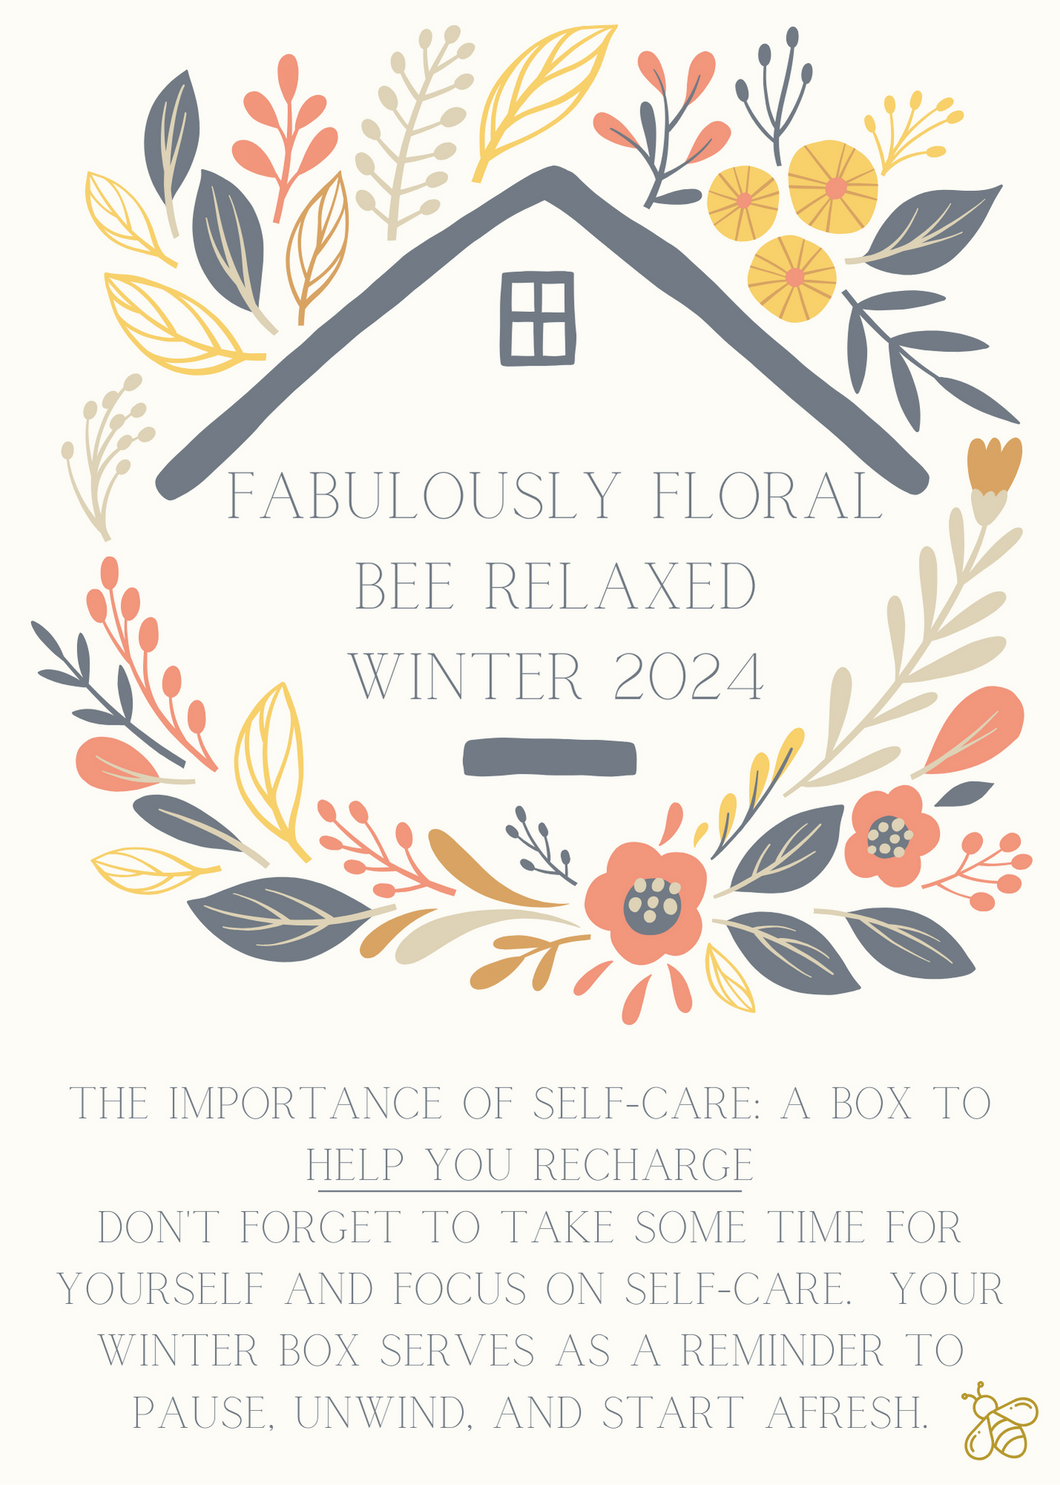 Fabulously Floral Winter 2024 Box